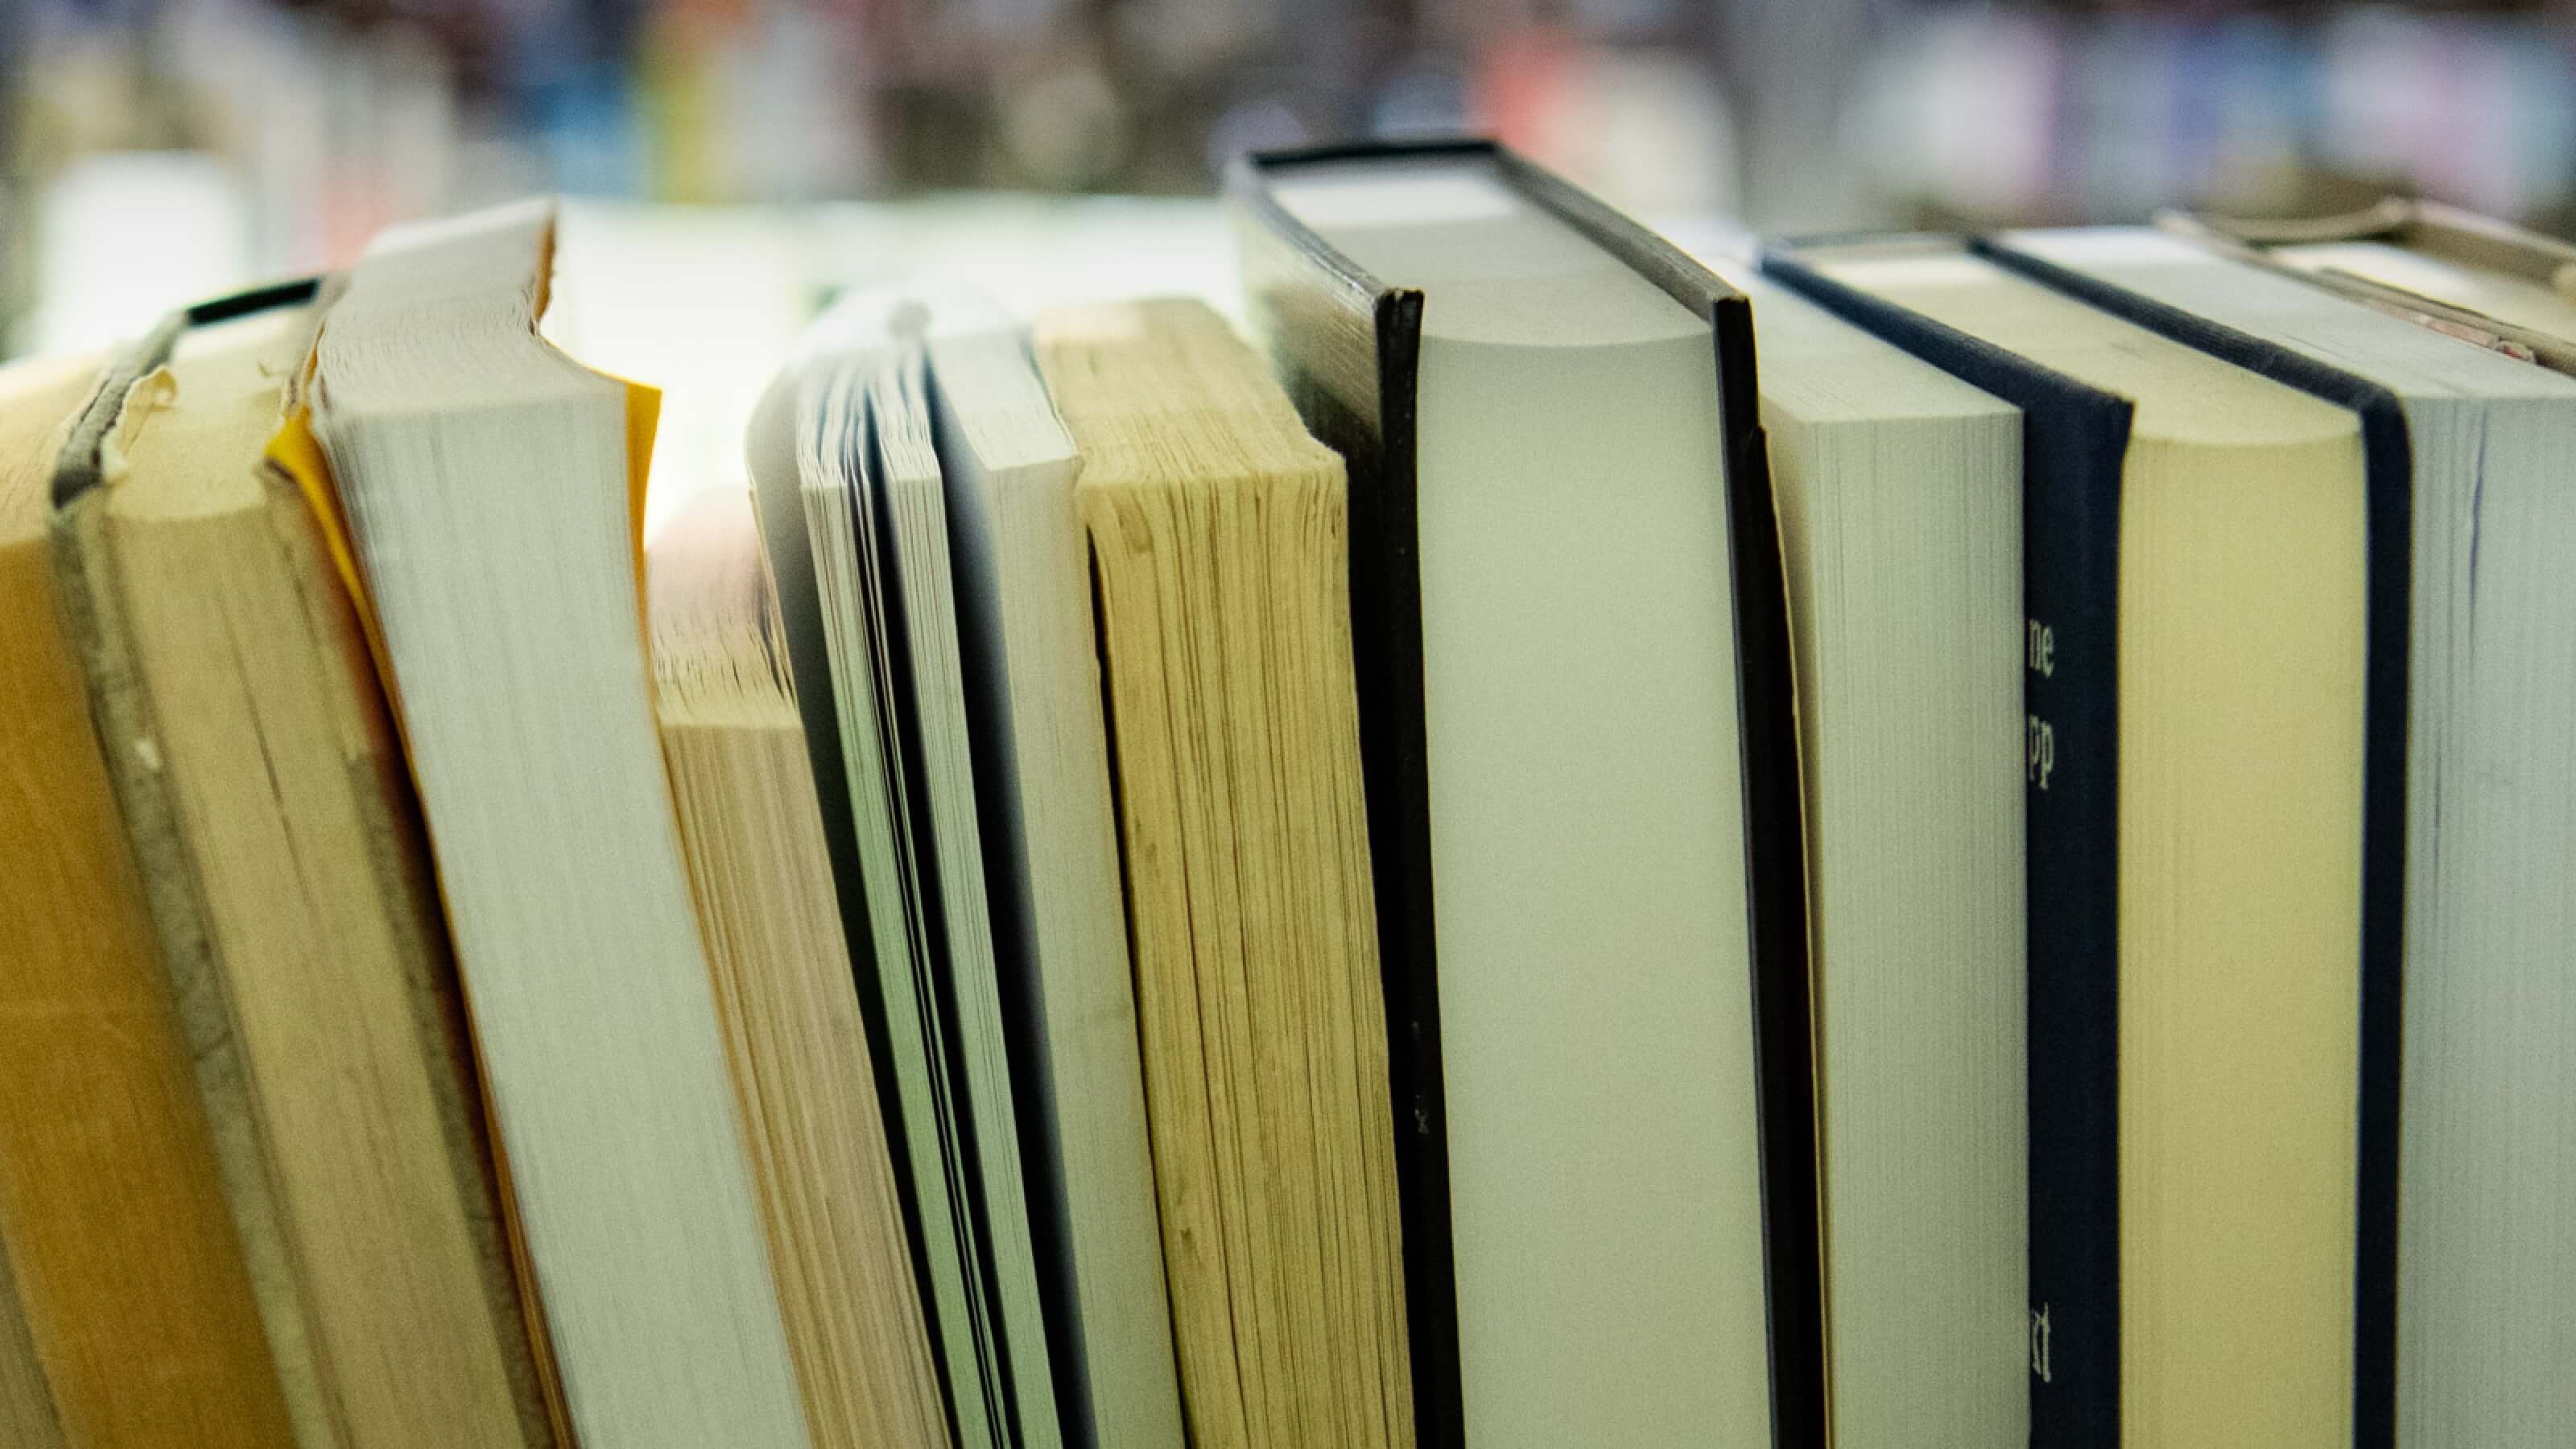 An image of books on a shelf as viewed from the perspective of looking at the pages between the covers.